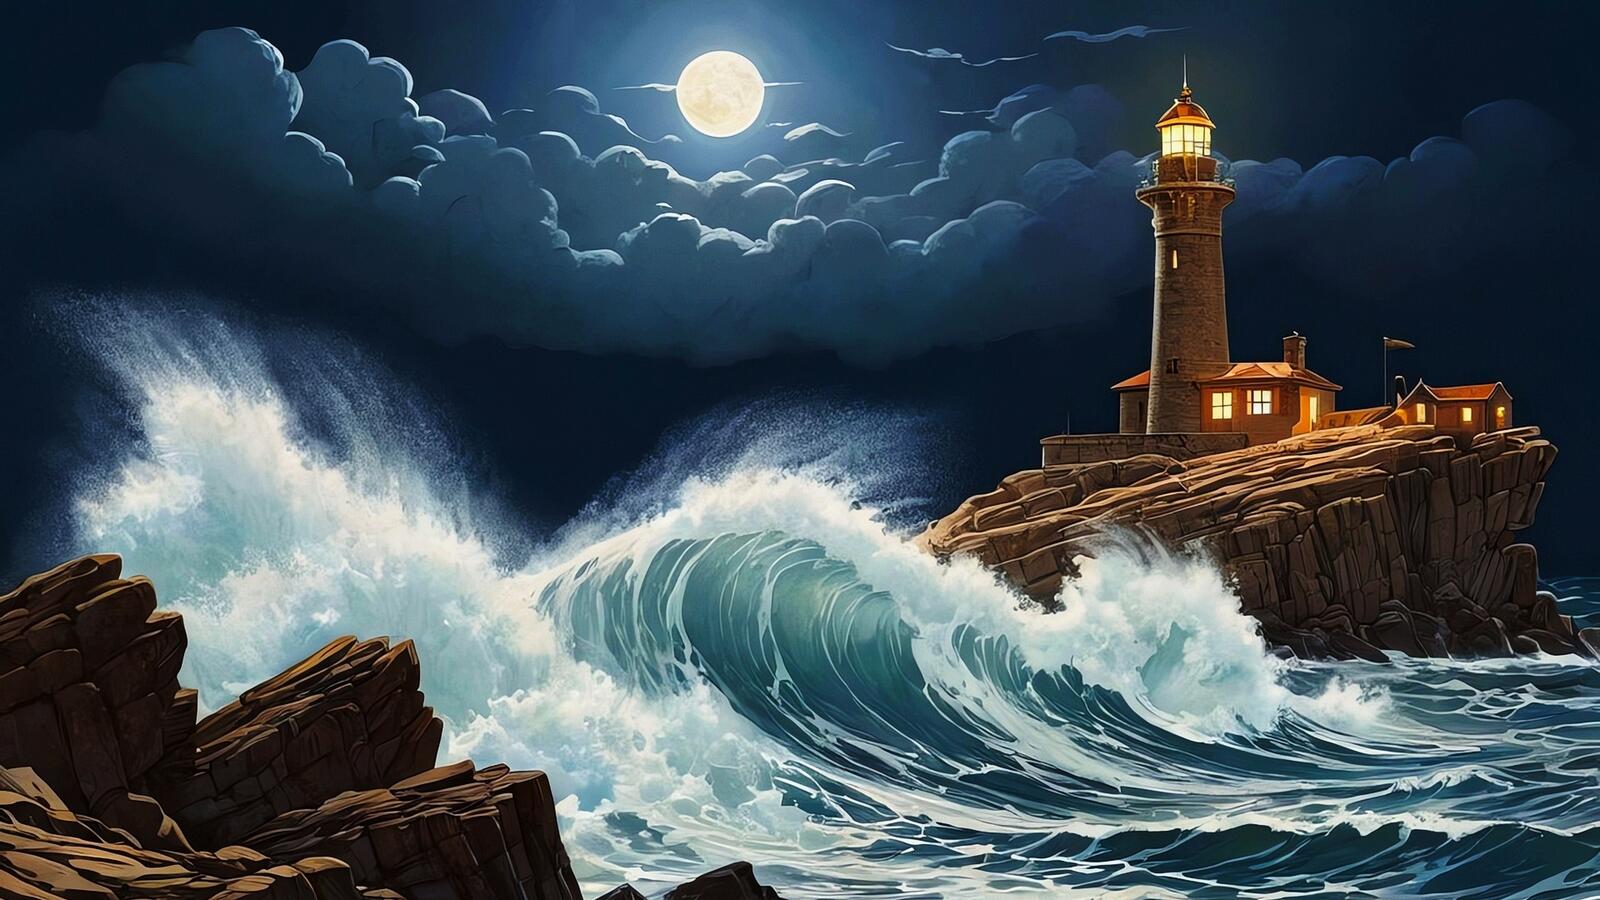 Free photo A drawing of a lighthouse at night and the sea